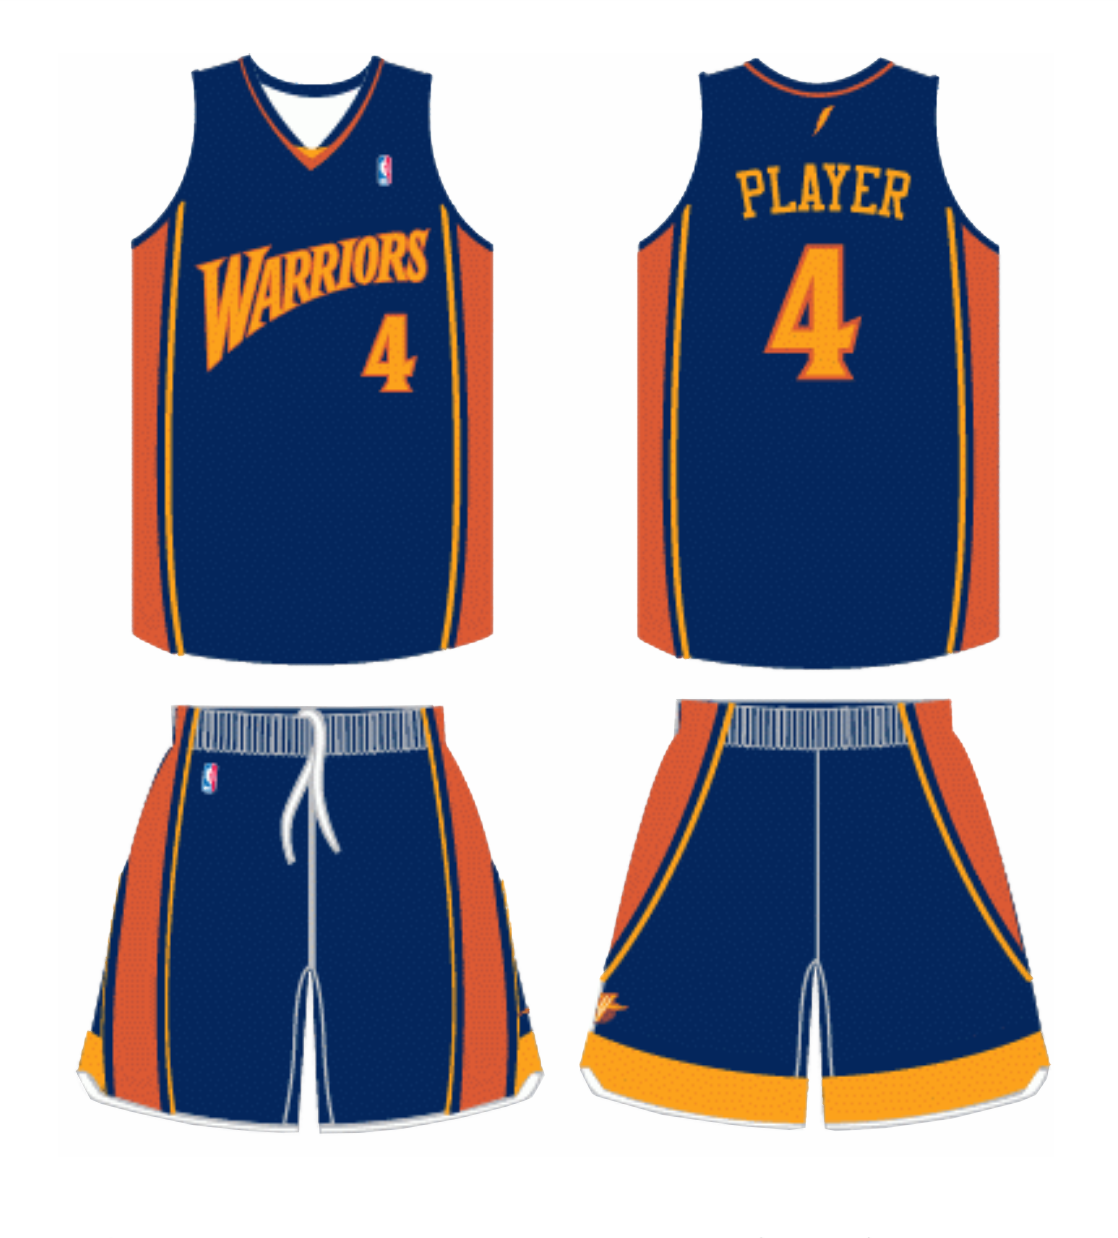 UNOFFICiAL ATHLETIC  Golden State Warriors Rebrand